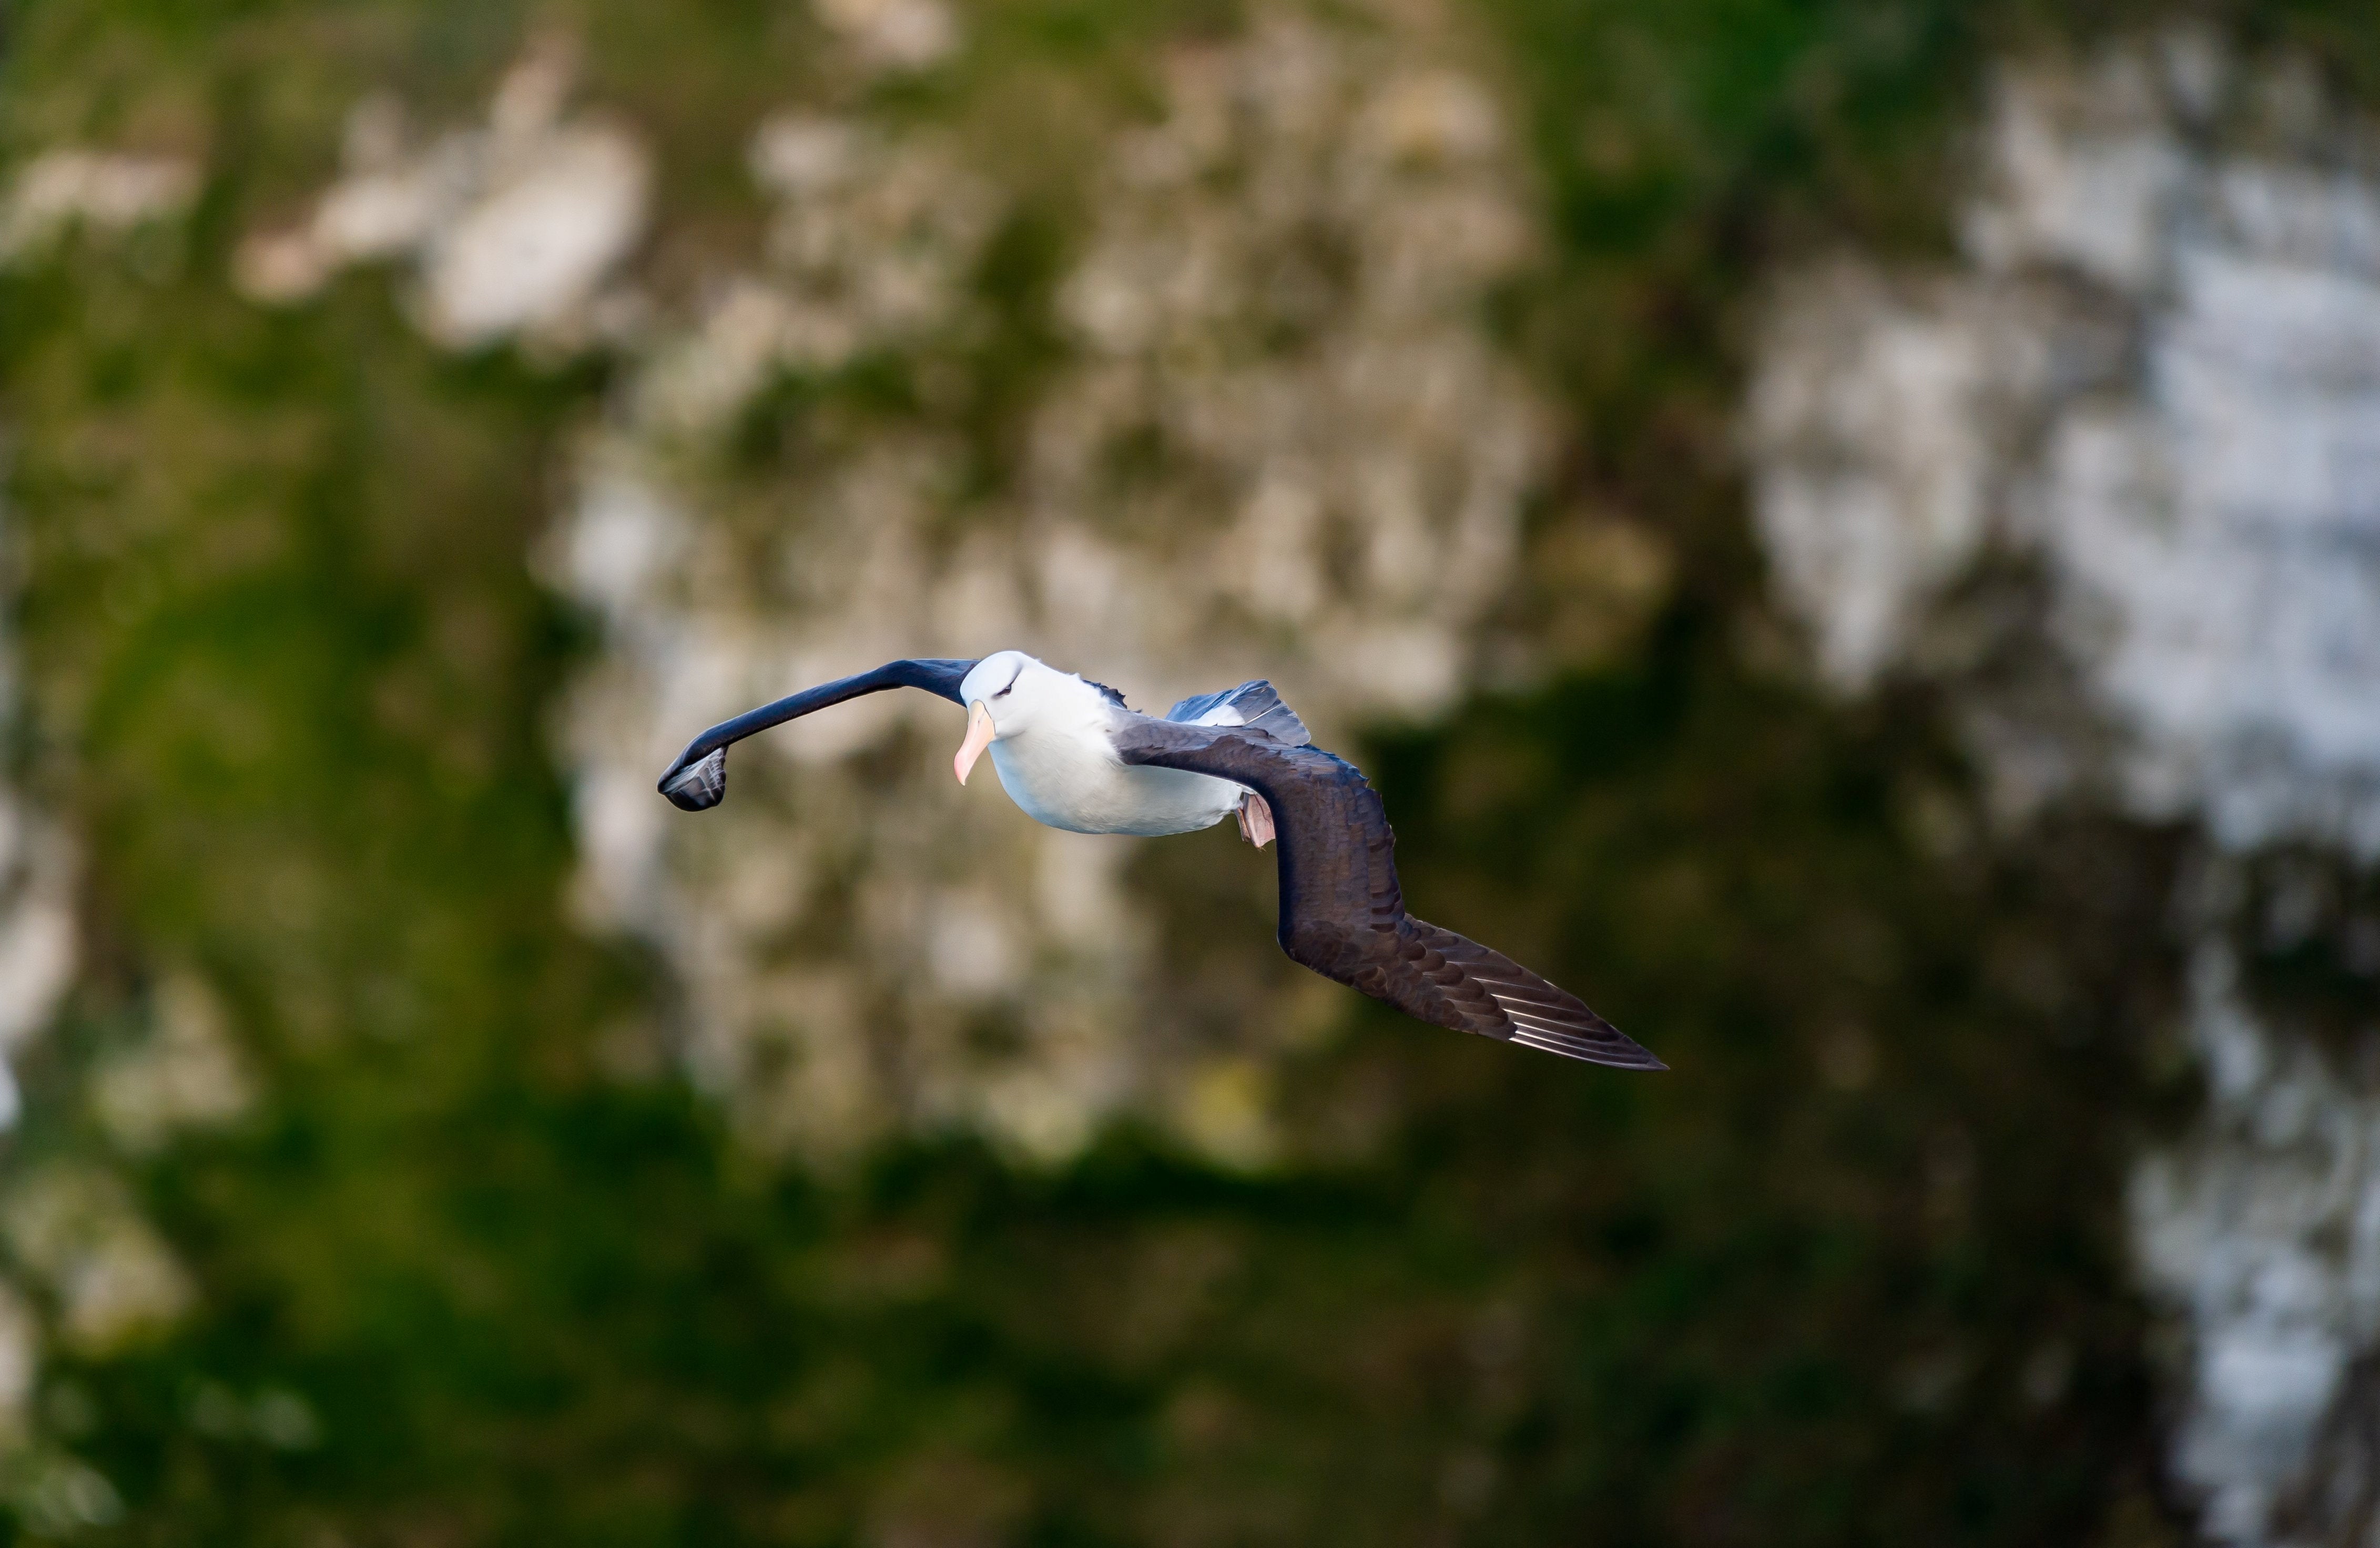 Albie the albatross has returned to the RSB Bempton Cliff nature reserve